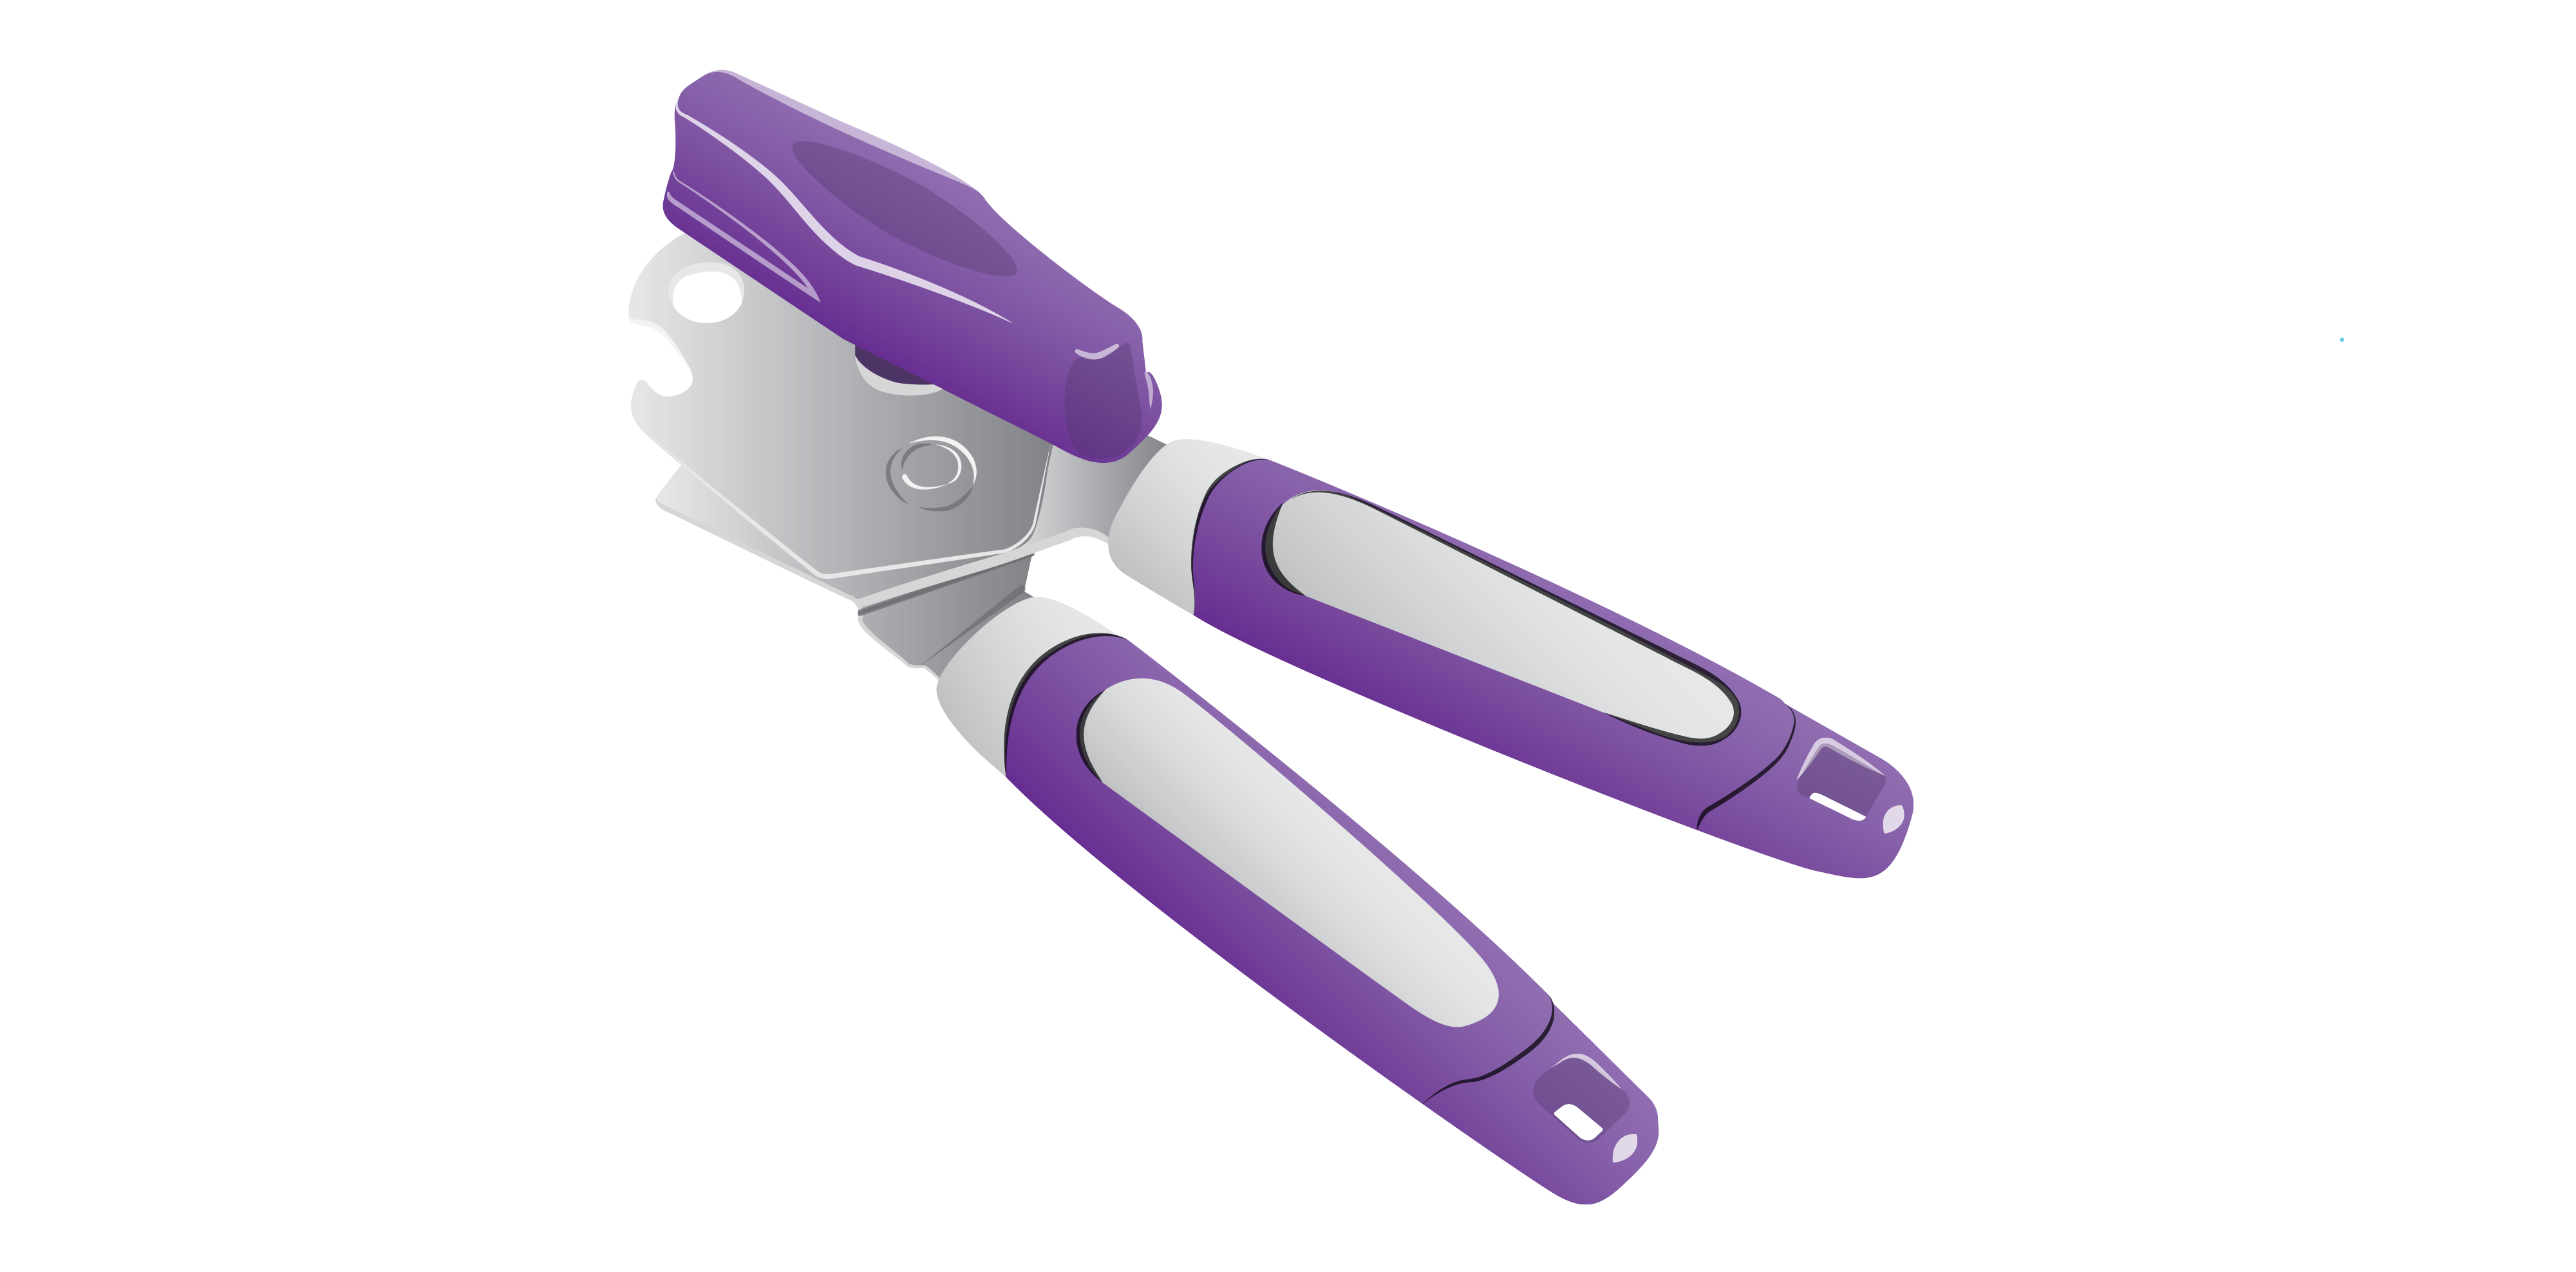 A manual can opener with metal blades and a shiny purple knob that turns and red handles that have white surface areas. The can opener is positioned like a pair of scissors, the handles are far apart in a V shape.